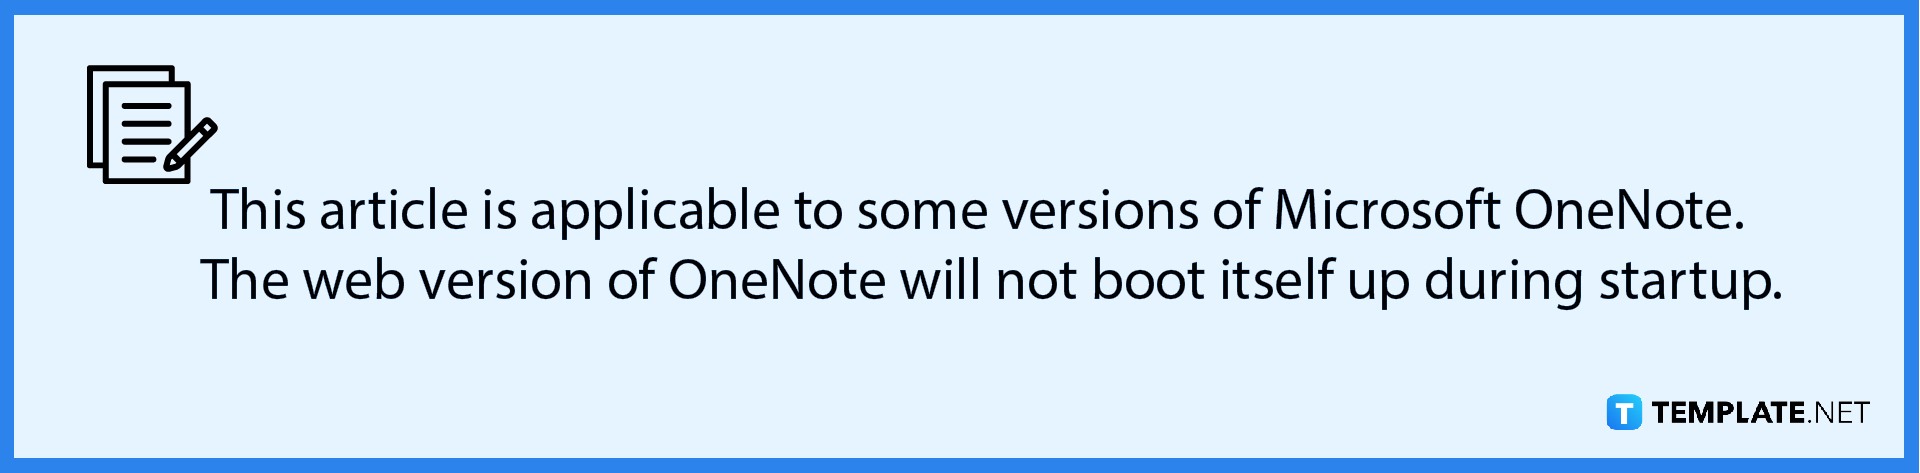 how-to-disable-microsoft-onenote-during-startup-note-1